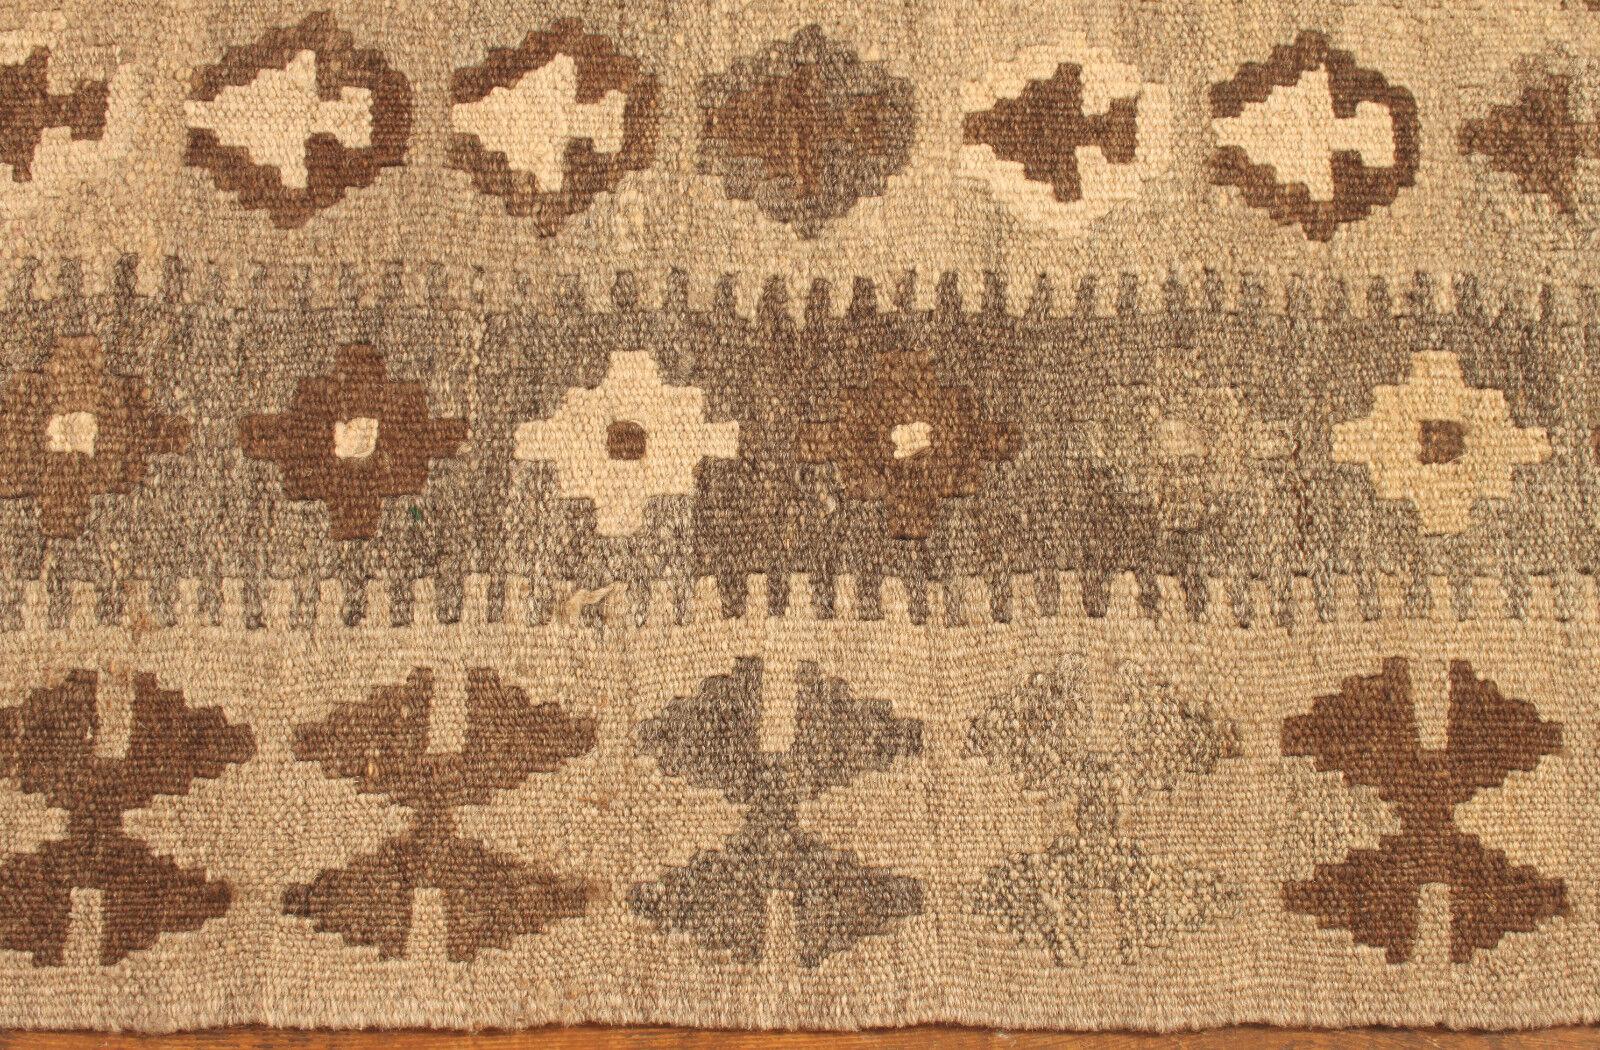 Handmade Vintage Afghan Flatweave Kilim 3.9' x 6.3', 1980s - 1T08 In Good Condition For Sale In Bordeaux, FR